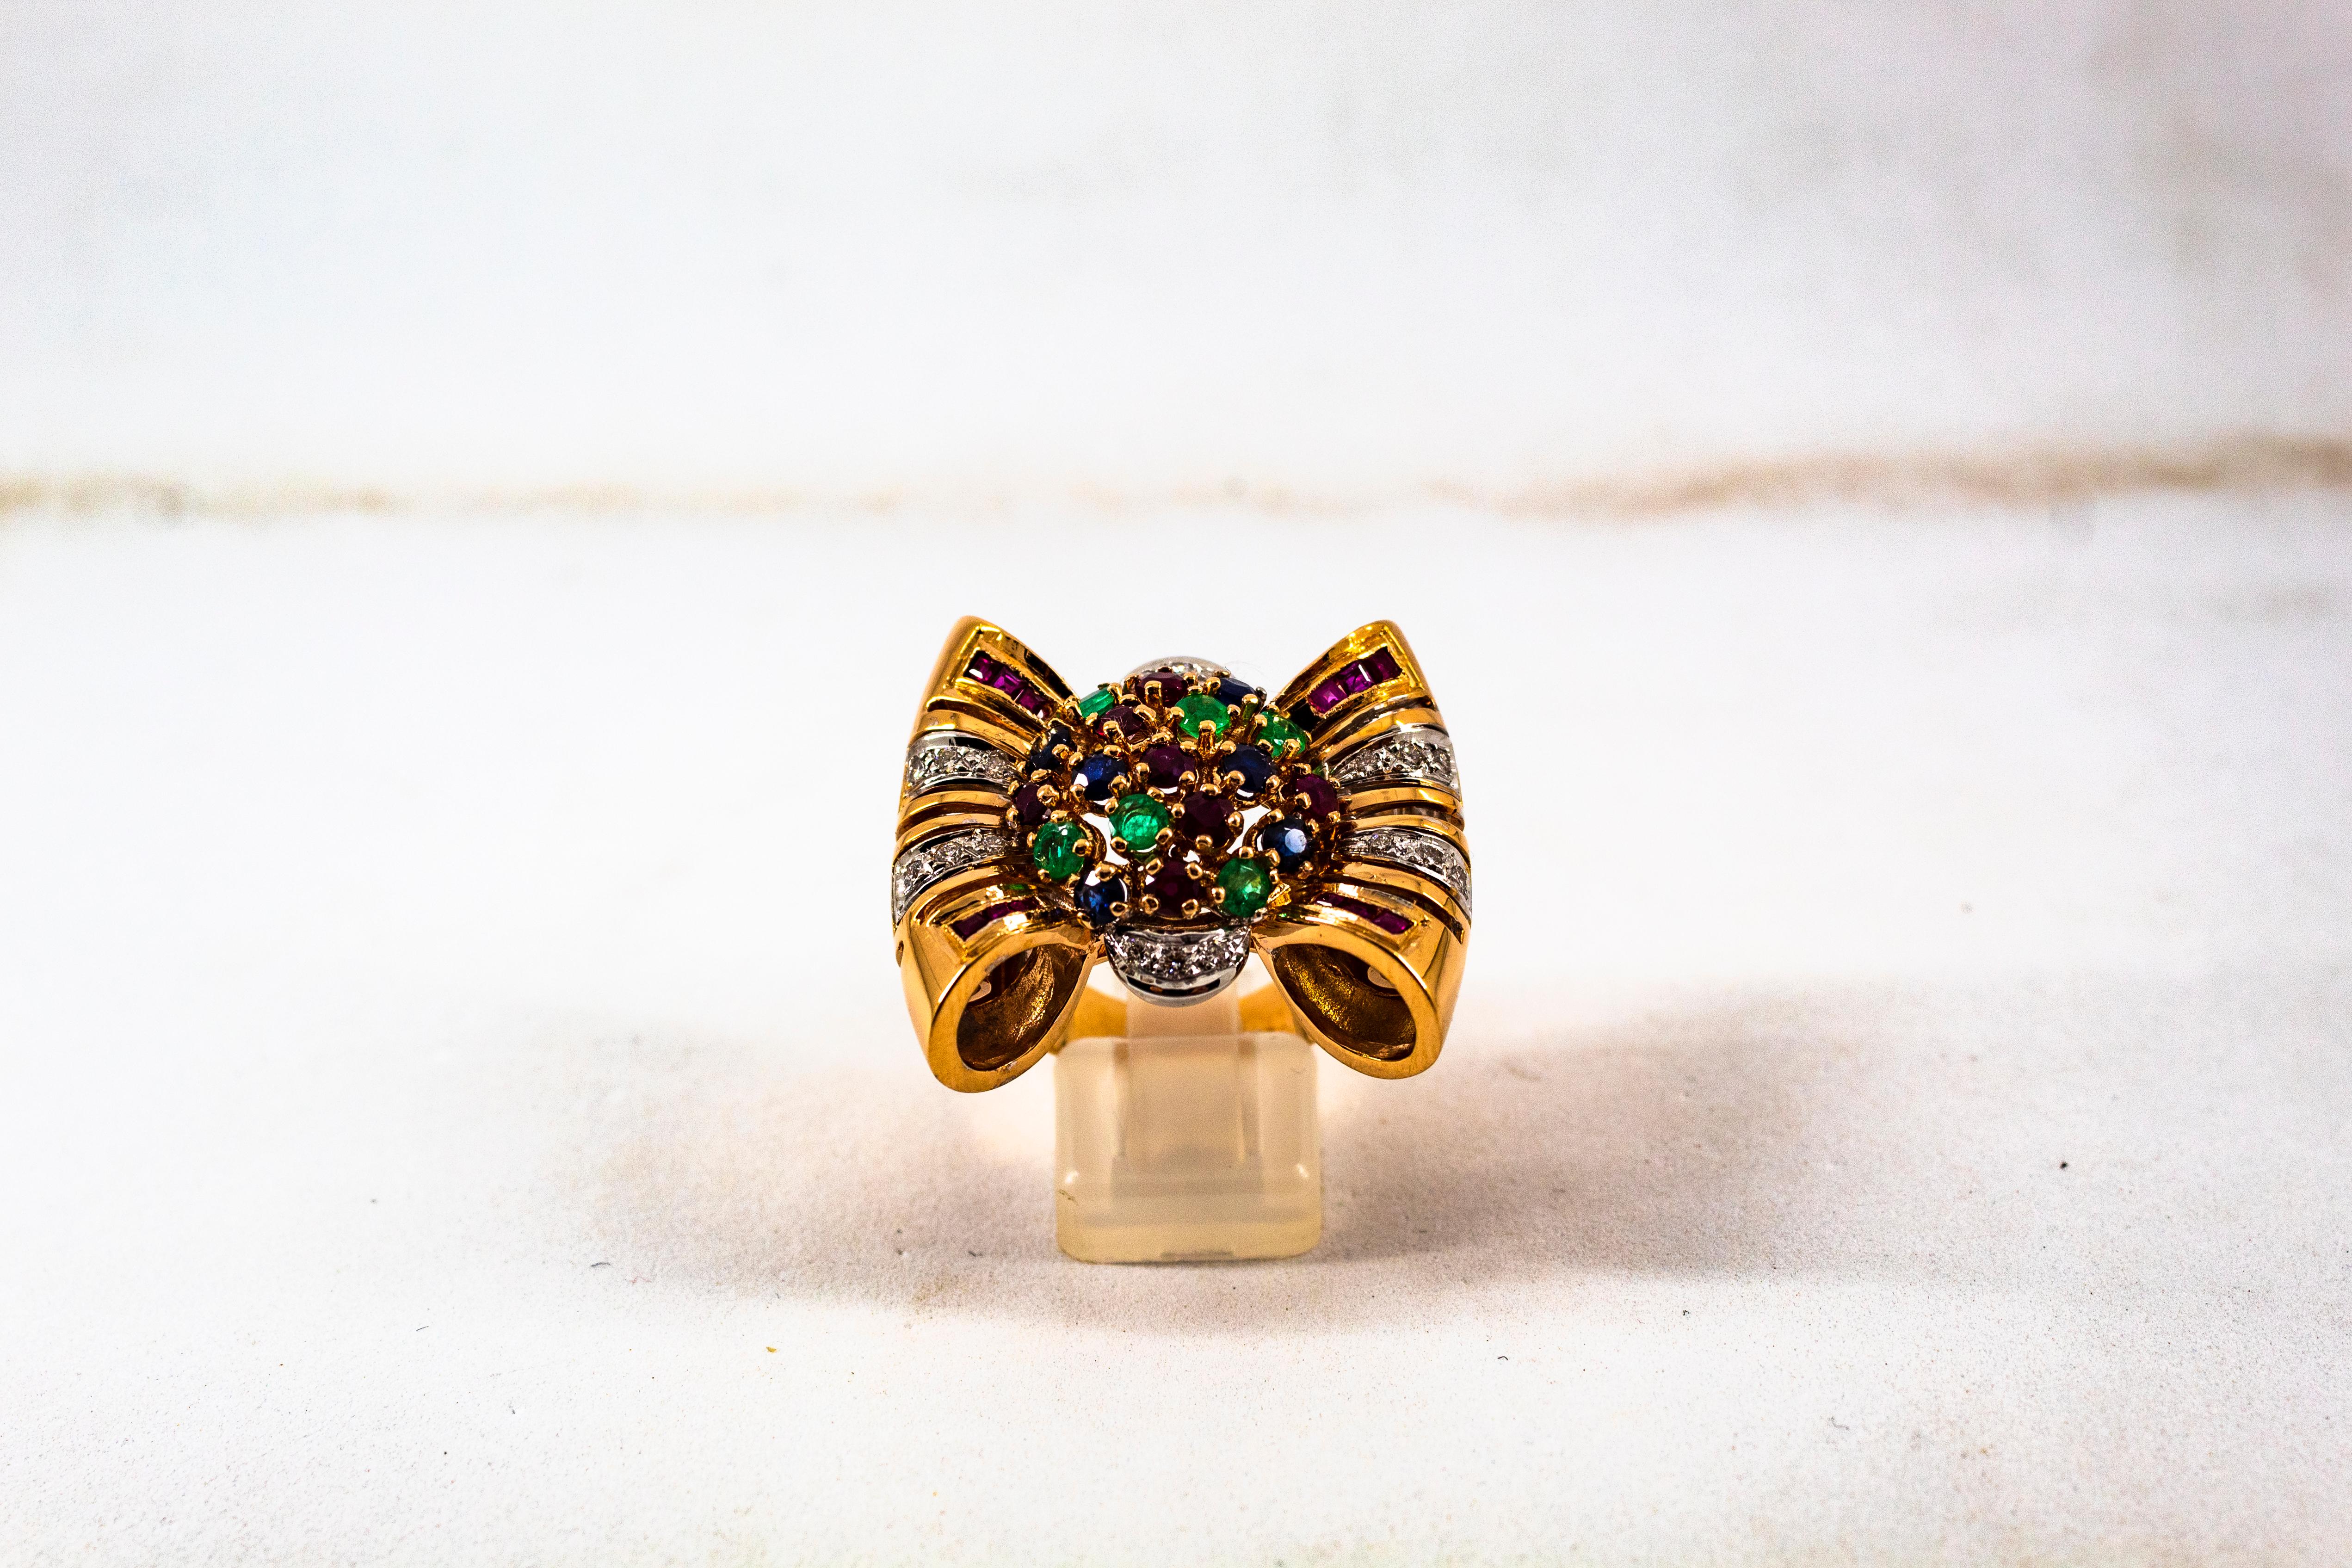 This Ring is made of 14K Yellow Gold.
This Ring has 0.30 Carats of White Brilliant Cut Diamonds.
This Ring has 1.30 Carats of Rubies.
This Ring has 0.90 Carats of Blue Sapphires.
This Ring has 0.80 Carats of Emeralds.

Size ITA: 16 USA: 7 1/2

This